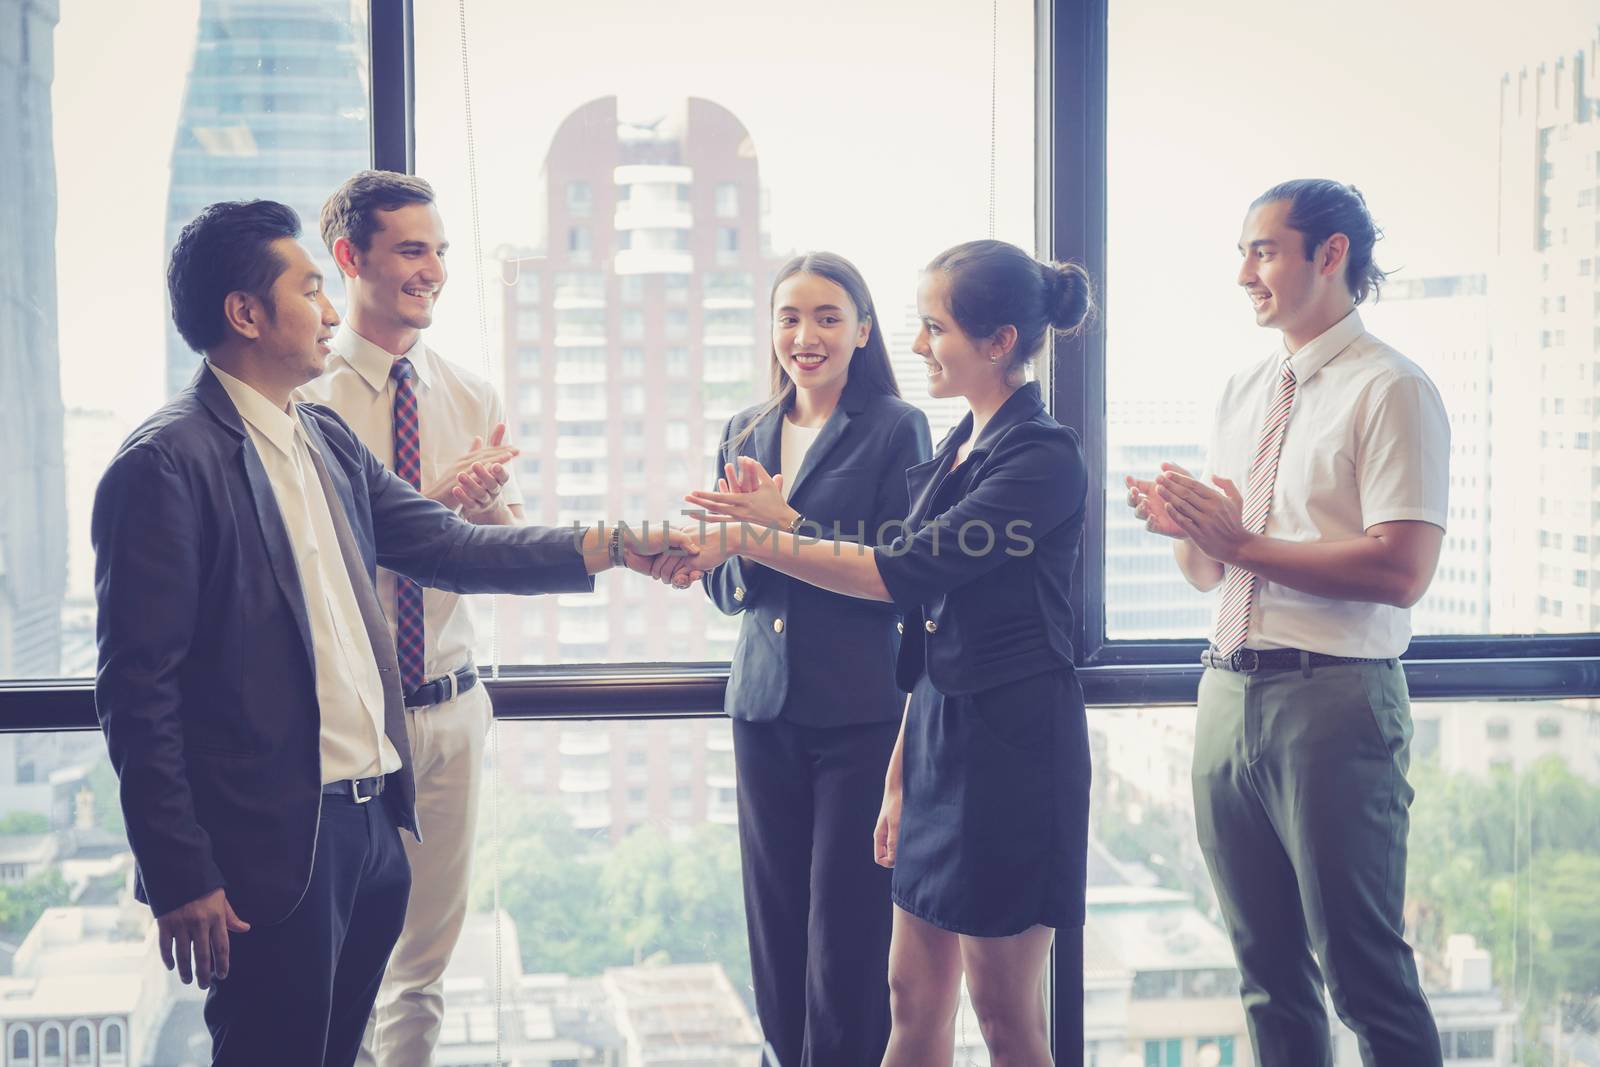 Business handshake and business people. Business executives to congratulate the joint business agreement.